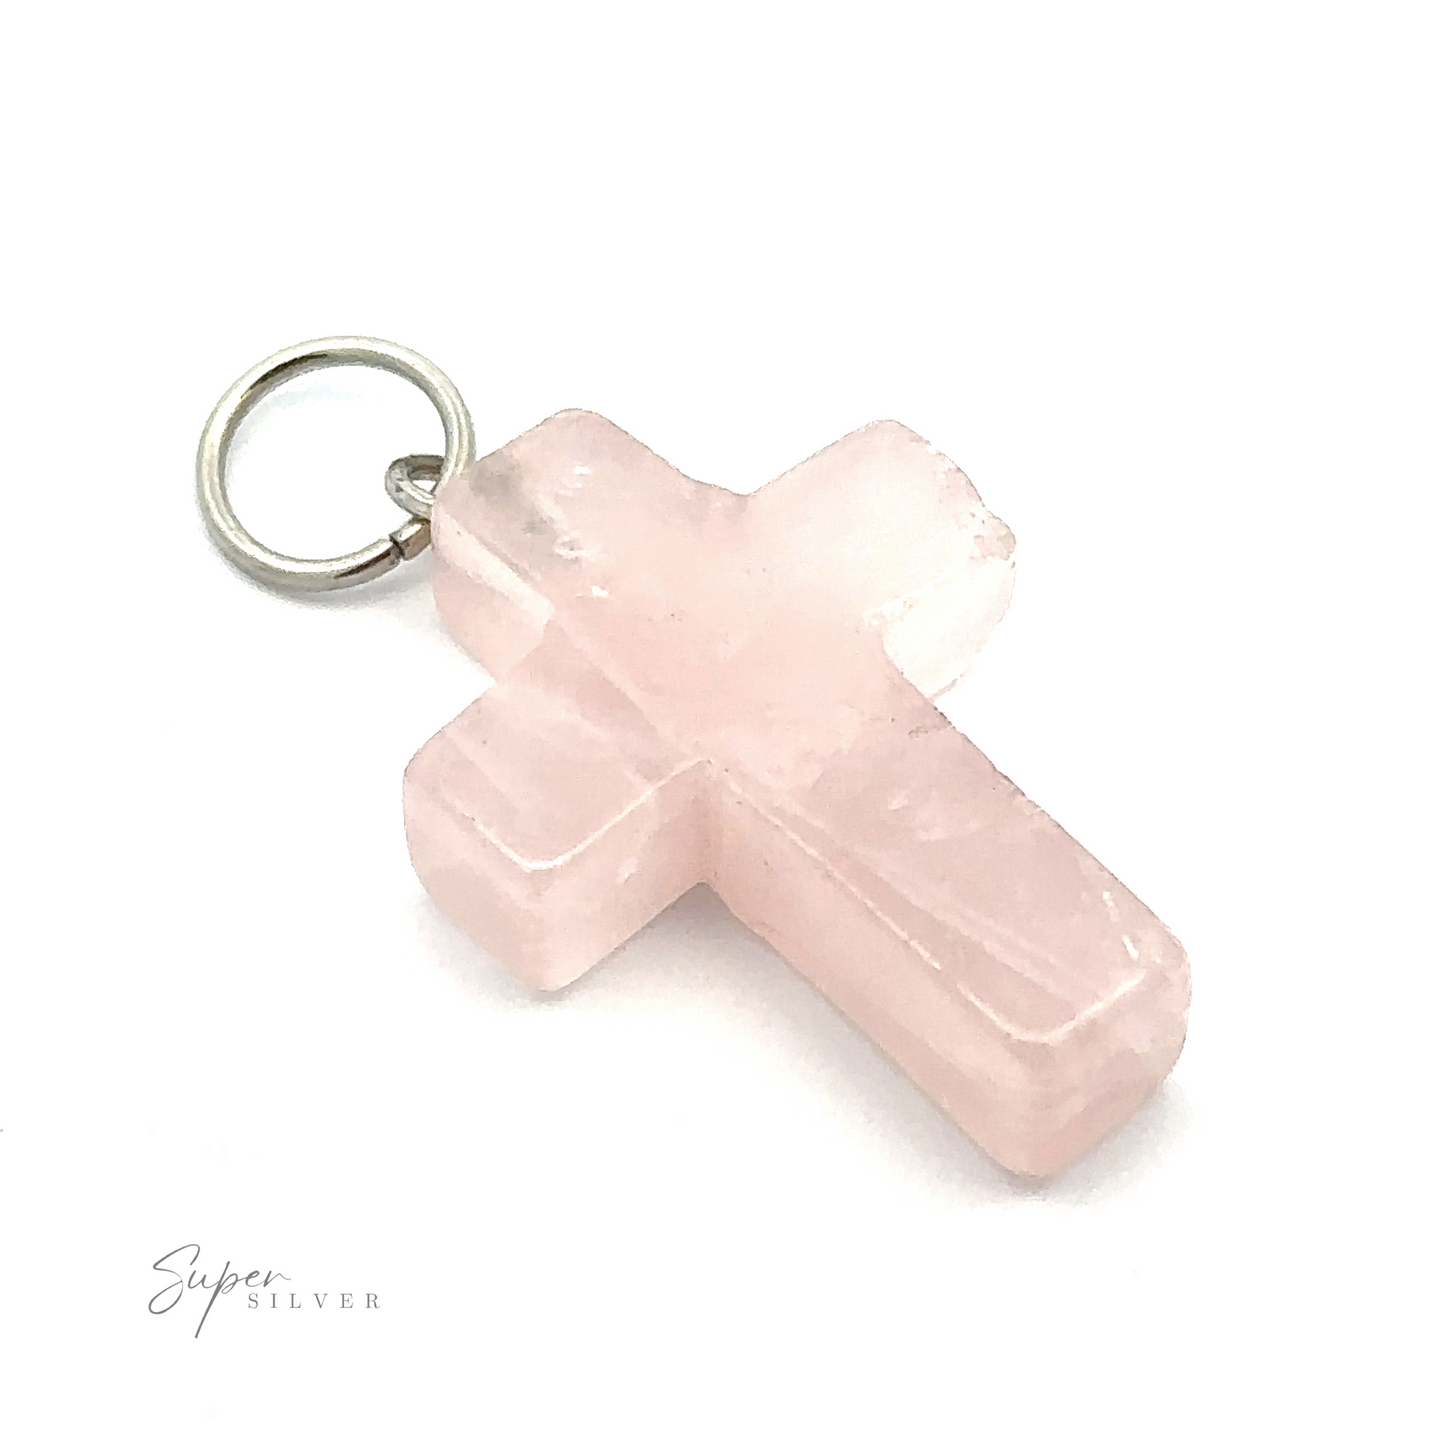 
                  
                    A Stone Cross Pendant featuring a light pink, rose quartz cross with a metal loop for attachment at the top. The stone cross has slightly rough, unpolished edges. The background is plain white.
                  
                